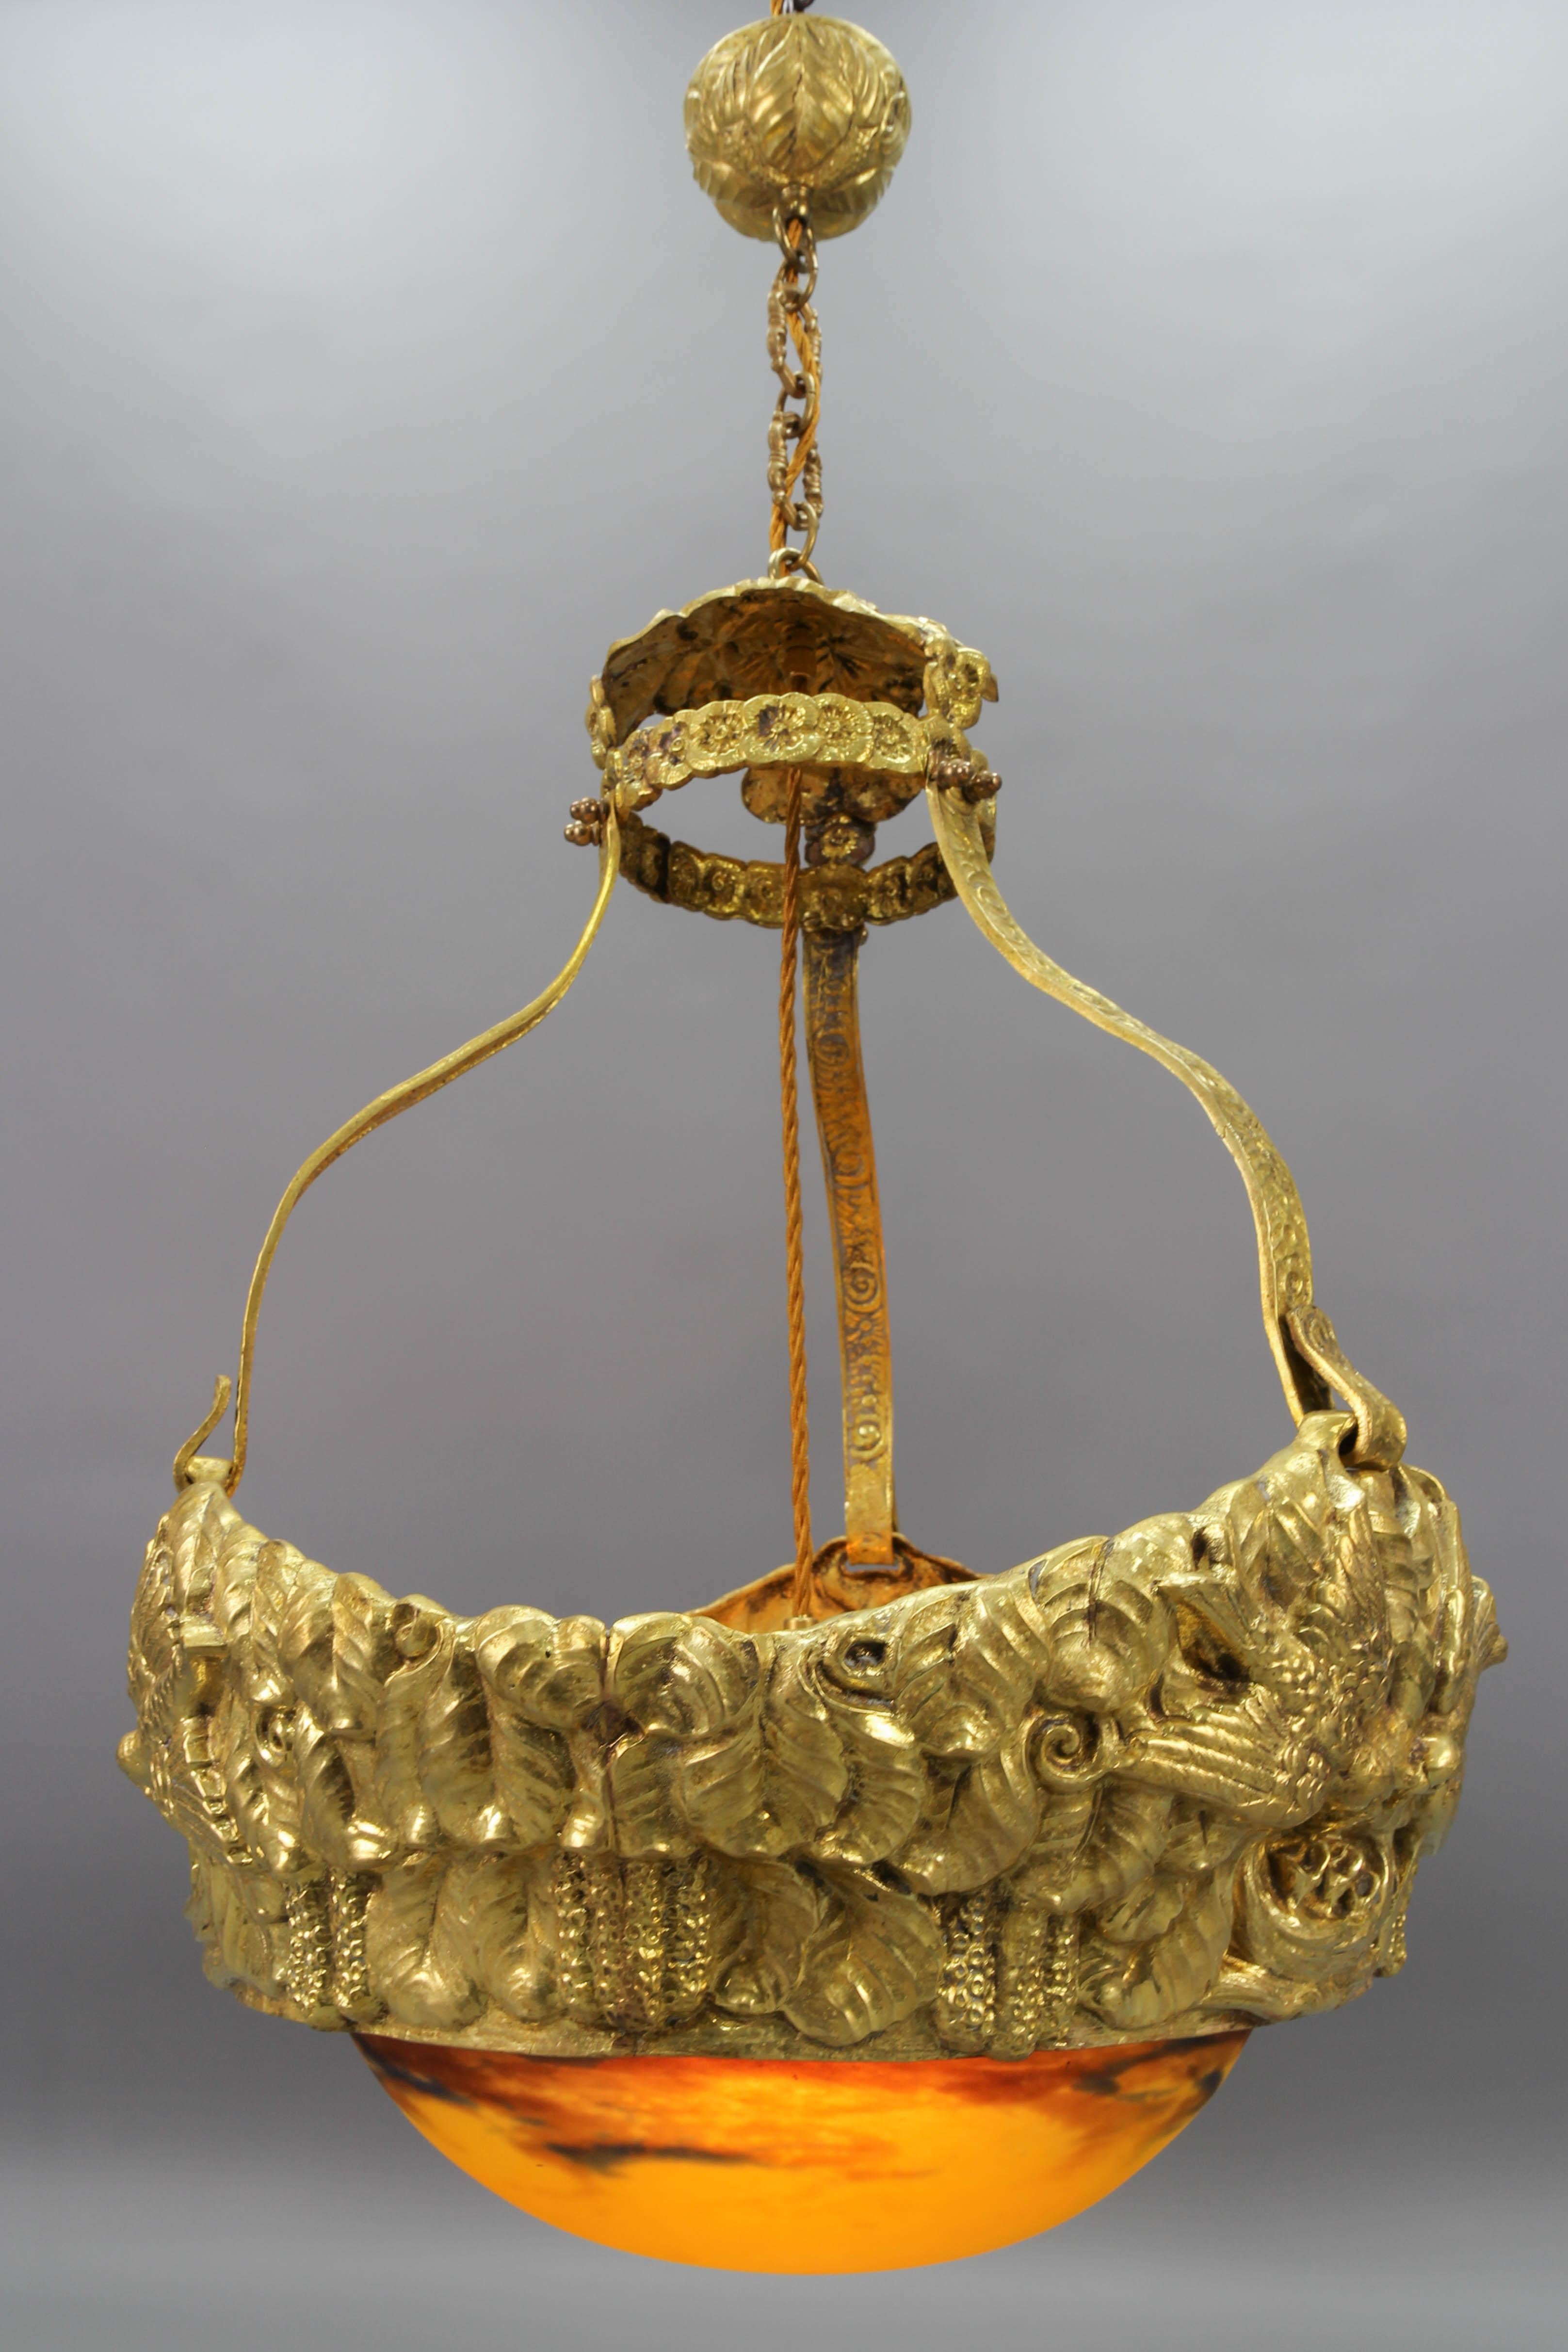 French Art Deco Brass Chandelier Pendant with Pâte de Verre Glass by Degué, from circa the 1930s.
This impressive French Art Deco chandelier features an ornate brass frame in the shape of a nest, on the sides depicting birds and a nest with baby